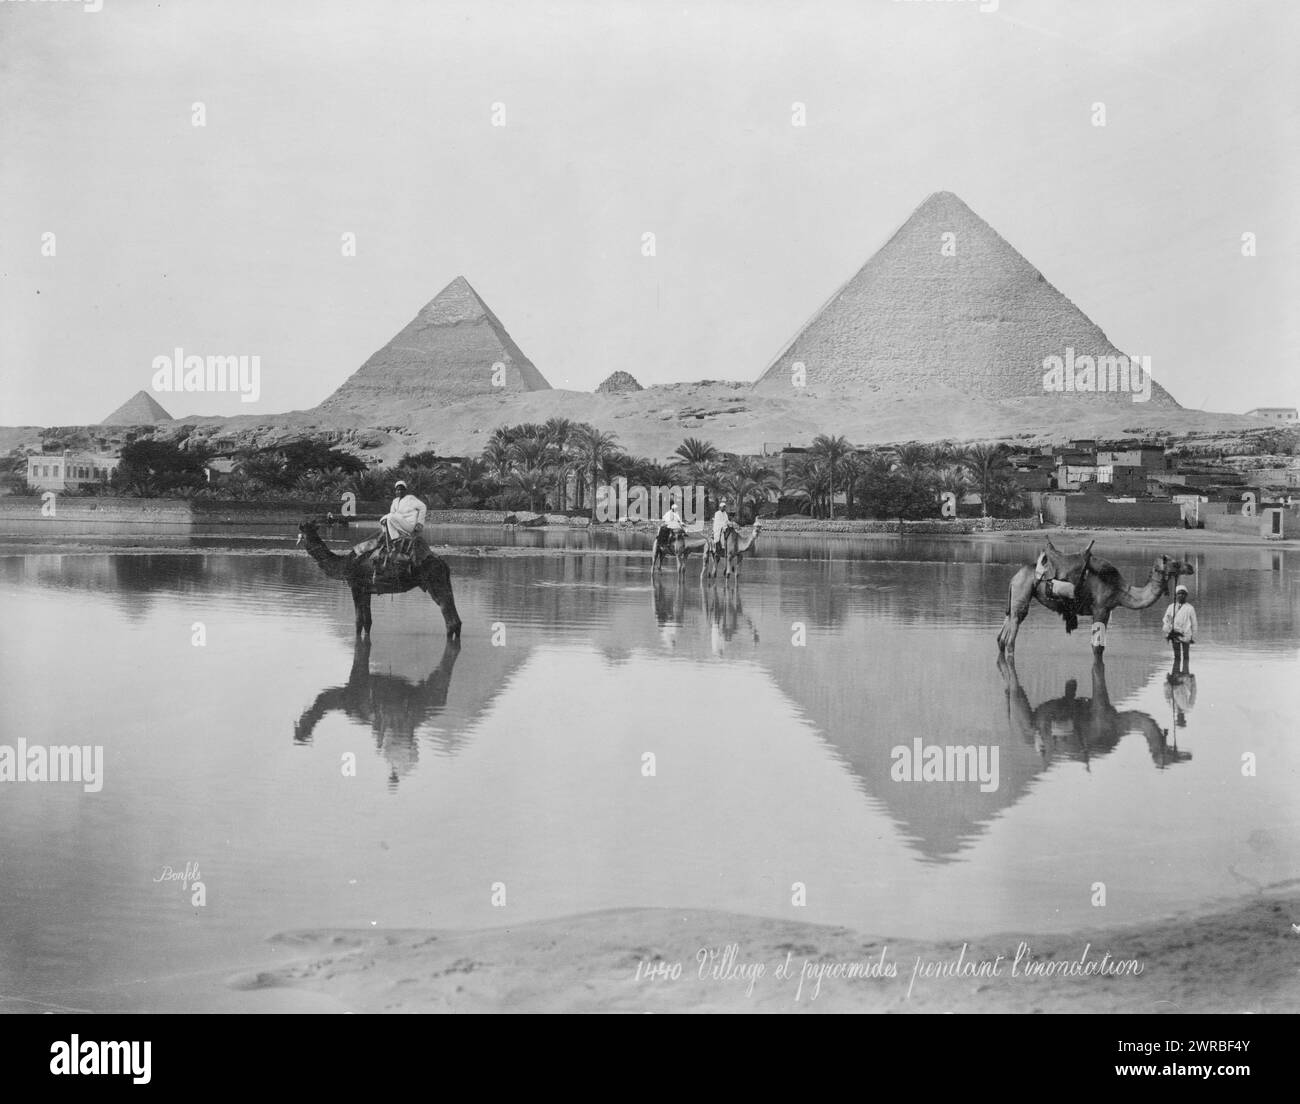 Egypt. Village and pyramids during the flood-time. ca. 189-, Photo shows men on camels and one man standing next to a camel in shallow flood water, with pyramids in the background, in Egypt., Carpenter, Frank G. (Frank George), 1855-1924, collector, between 1890 and 1900, Pyramids, Egypt, 1890-1900, Photographic prints, 1890-1900., Photographic prints, 1890-1900, 1 photographic print Stock Photo